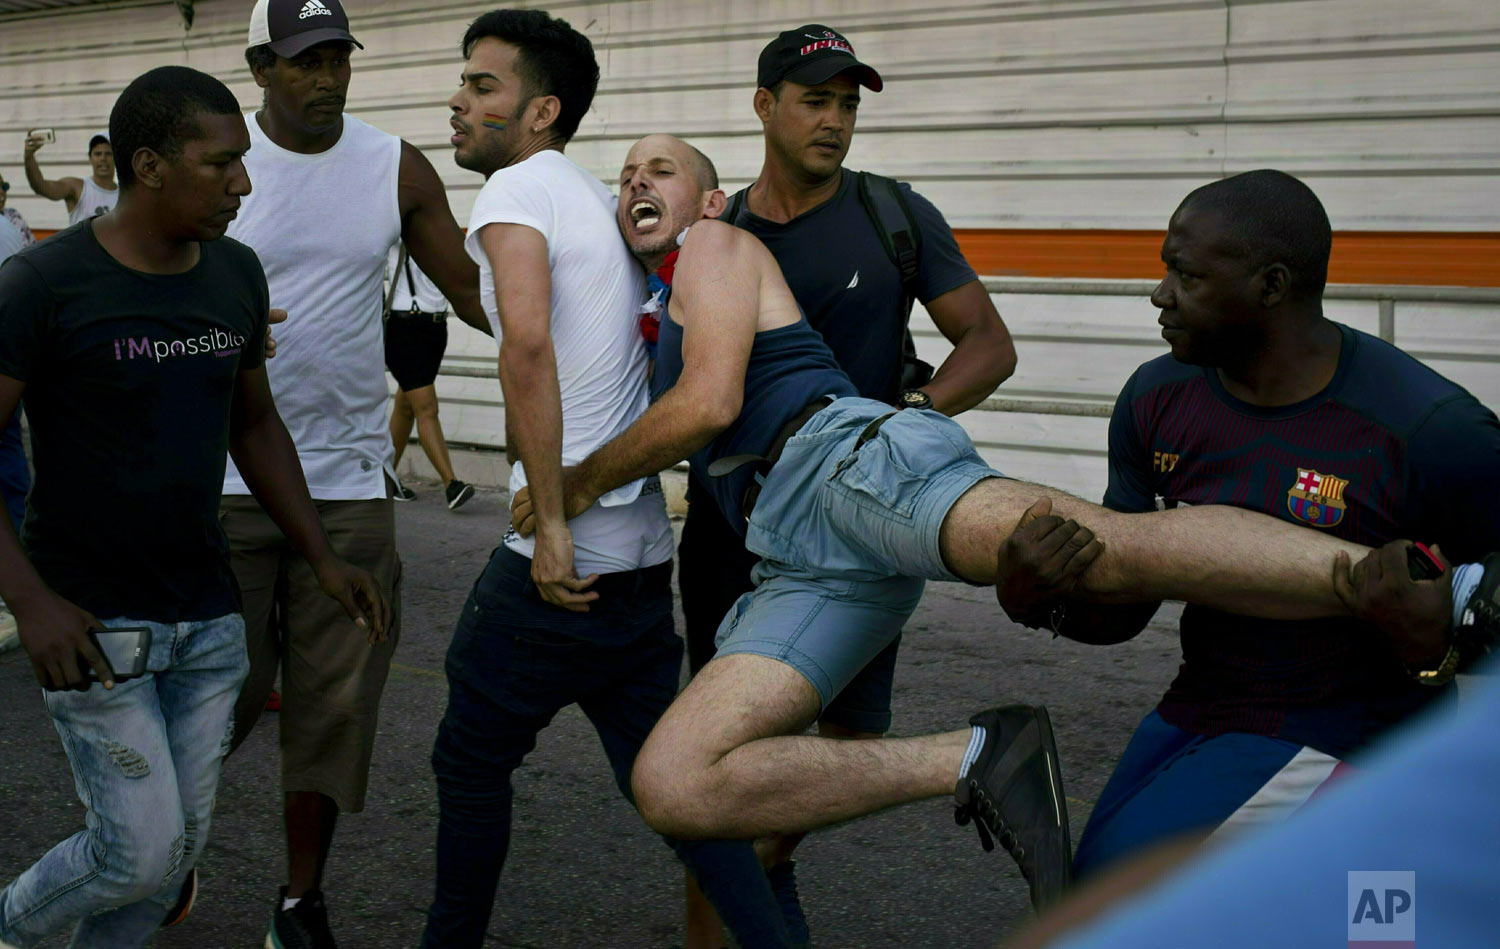  Police detain a gay rights activist taking part in an unauthorized march in Havana, Cuba, Saturday, May 11, 2019. The march was organized using Cuba's new mobile internet, with activists and supporters calling for a rally over Facebook and WhatsApp 